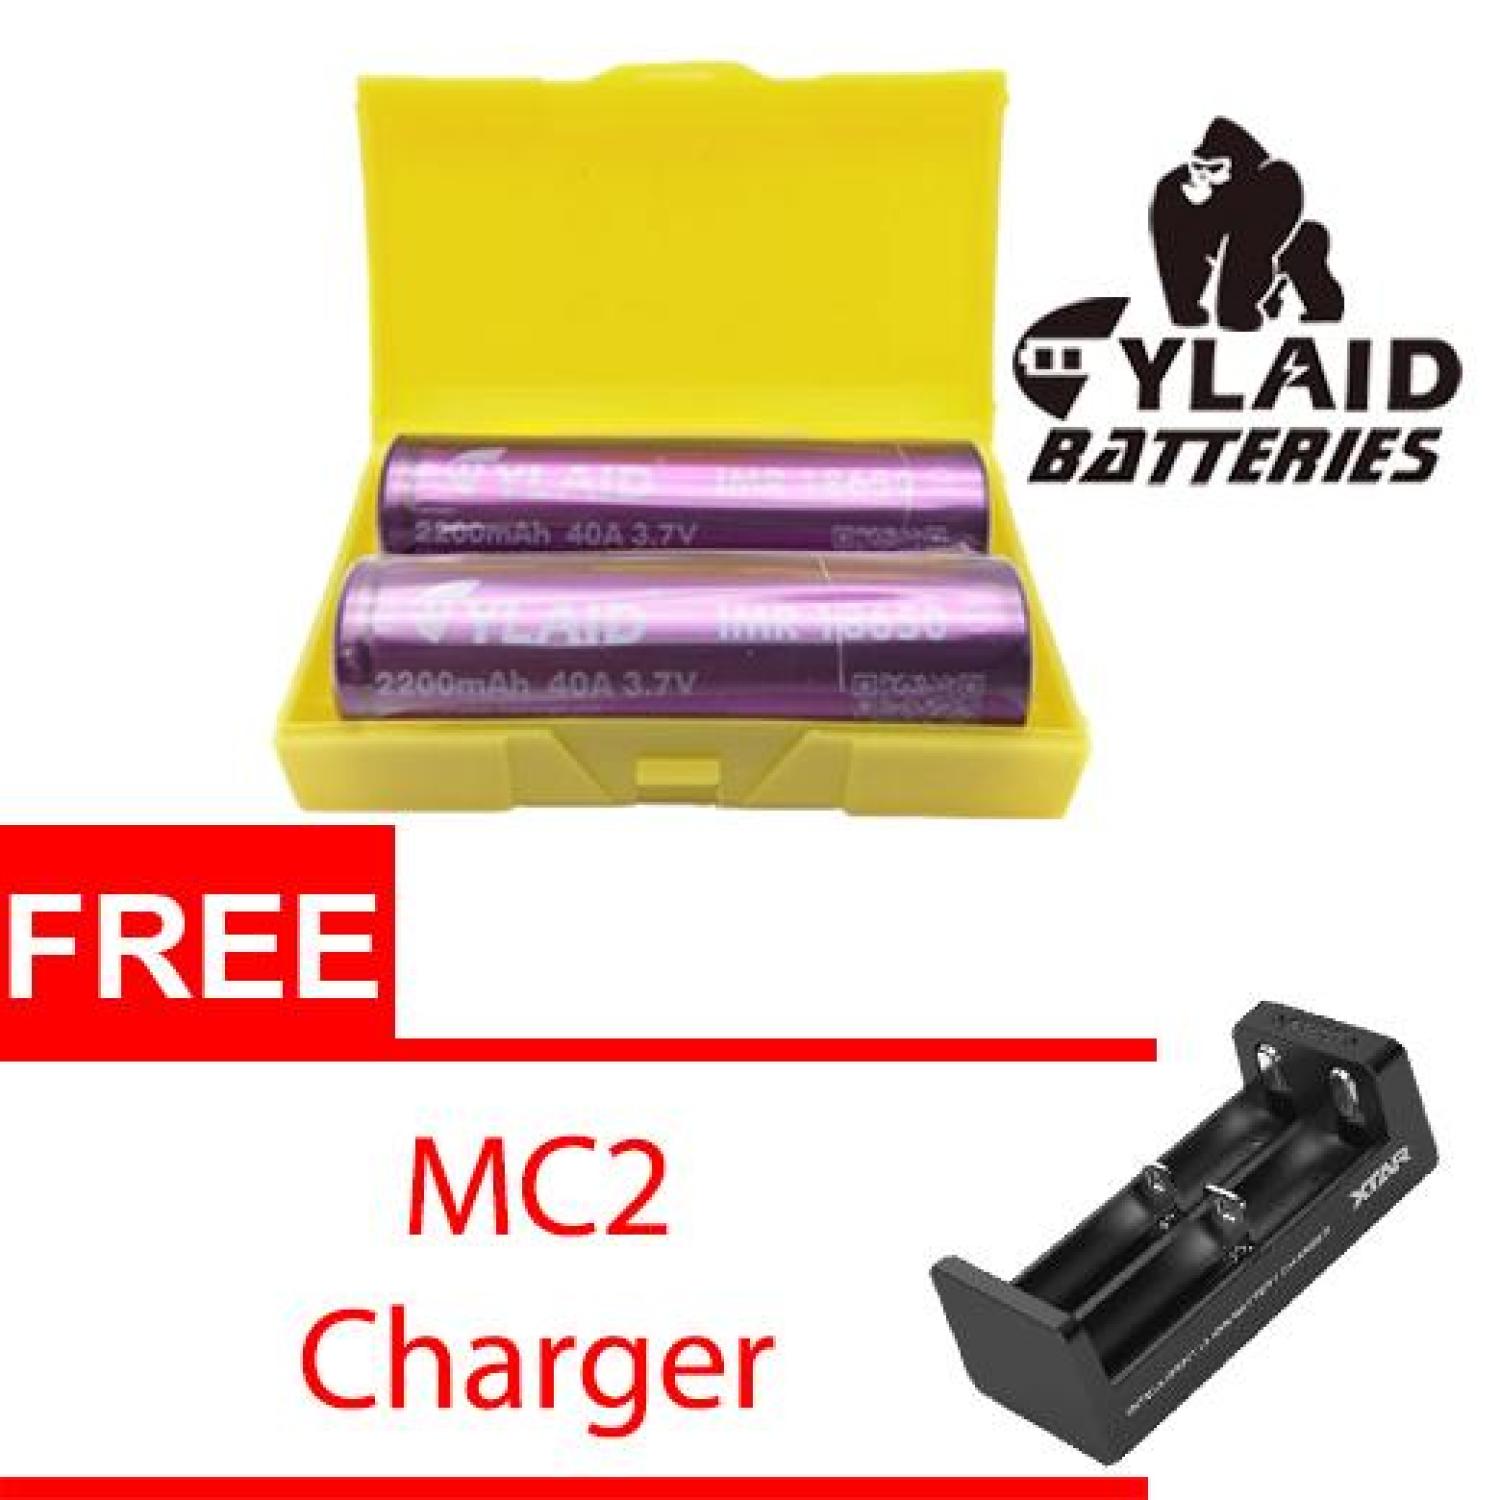 Cylaid 40a 20mah Violet Battery Legit Free Xtar Mc2 Charger Review And Price